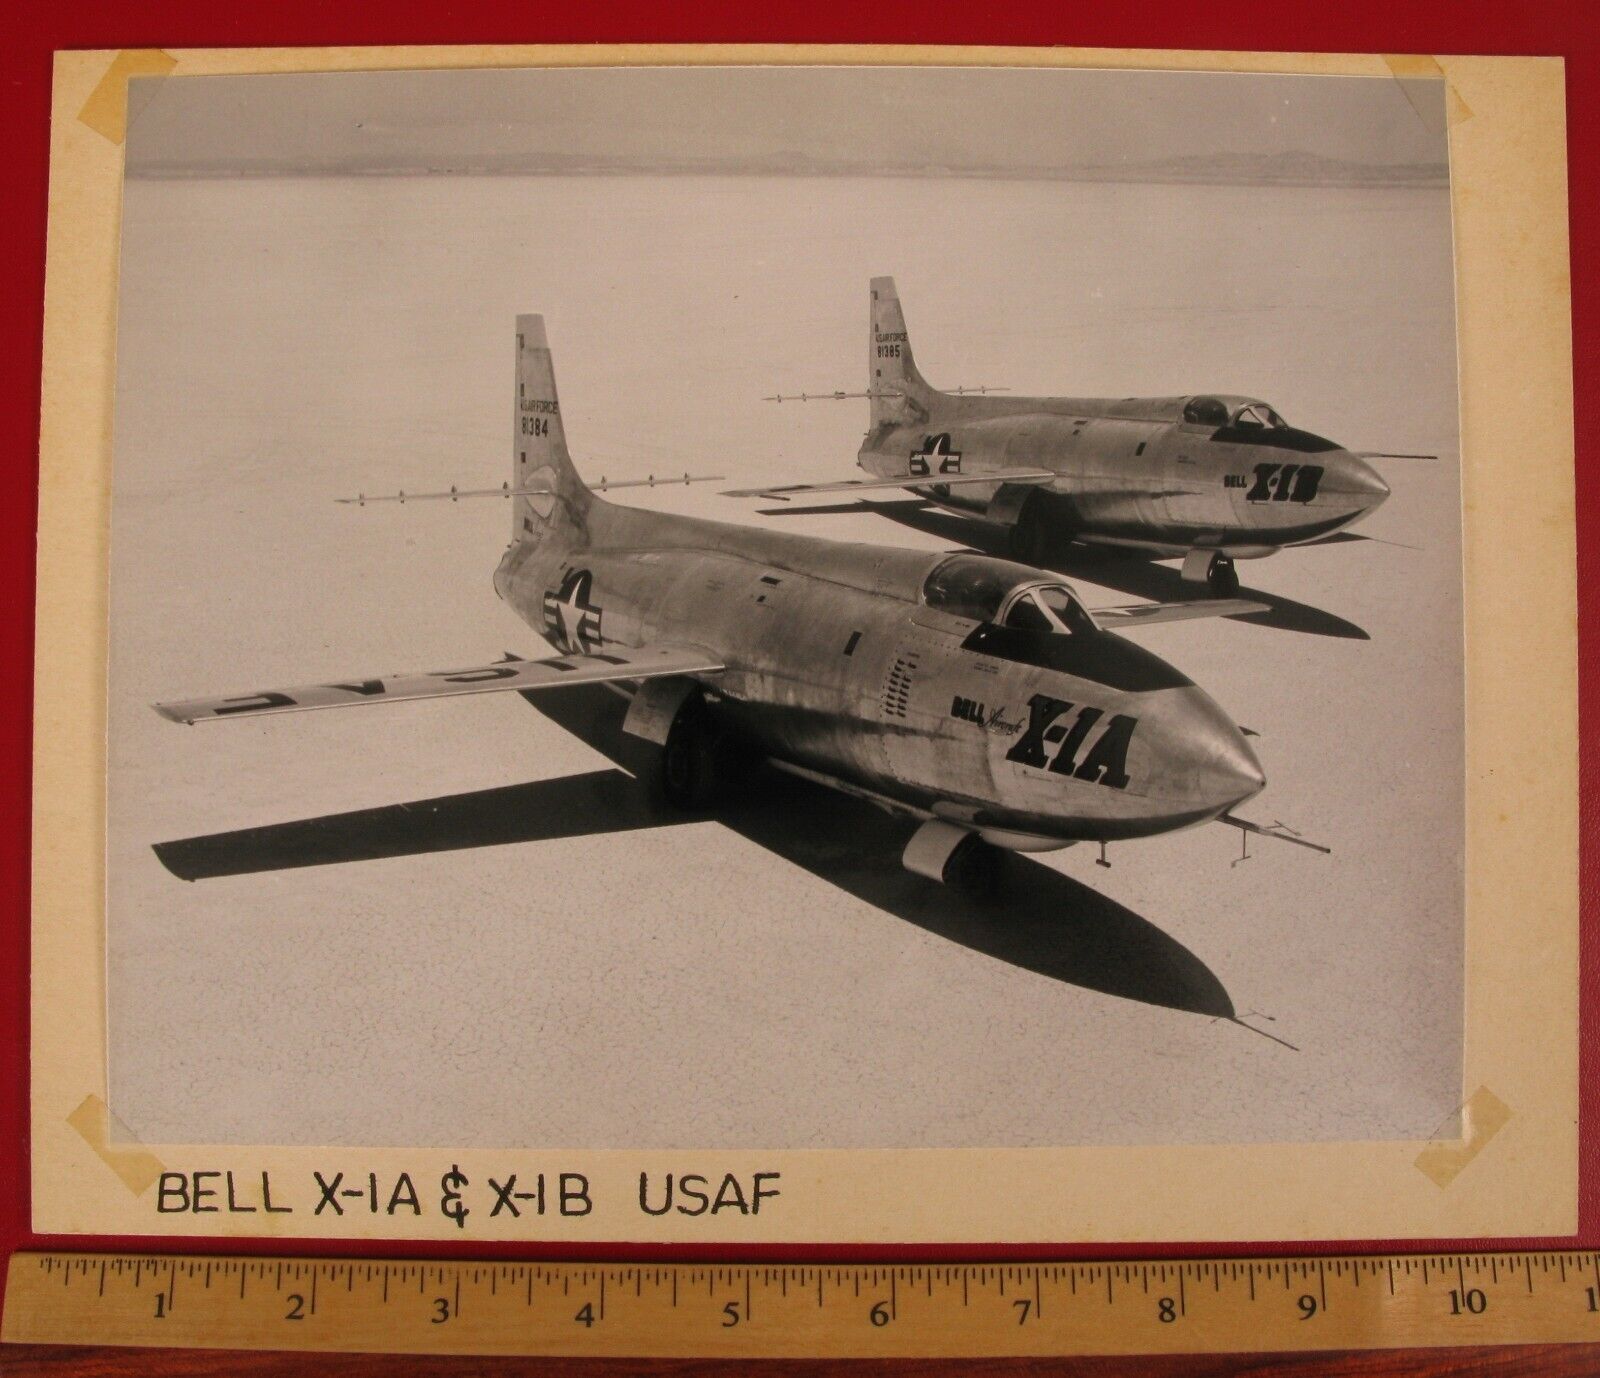 VINTAGE PHOTOGRAPH BELL X-1A AND X-1B USAF USAAF MILITARY AIRPLANE JET AIRCRAFT